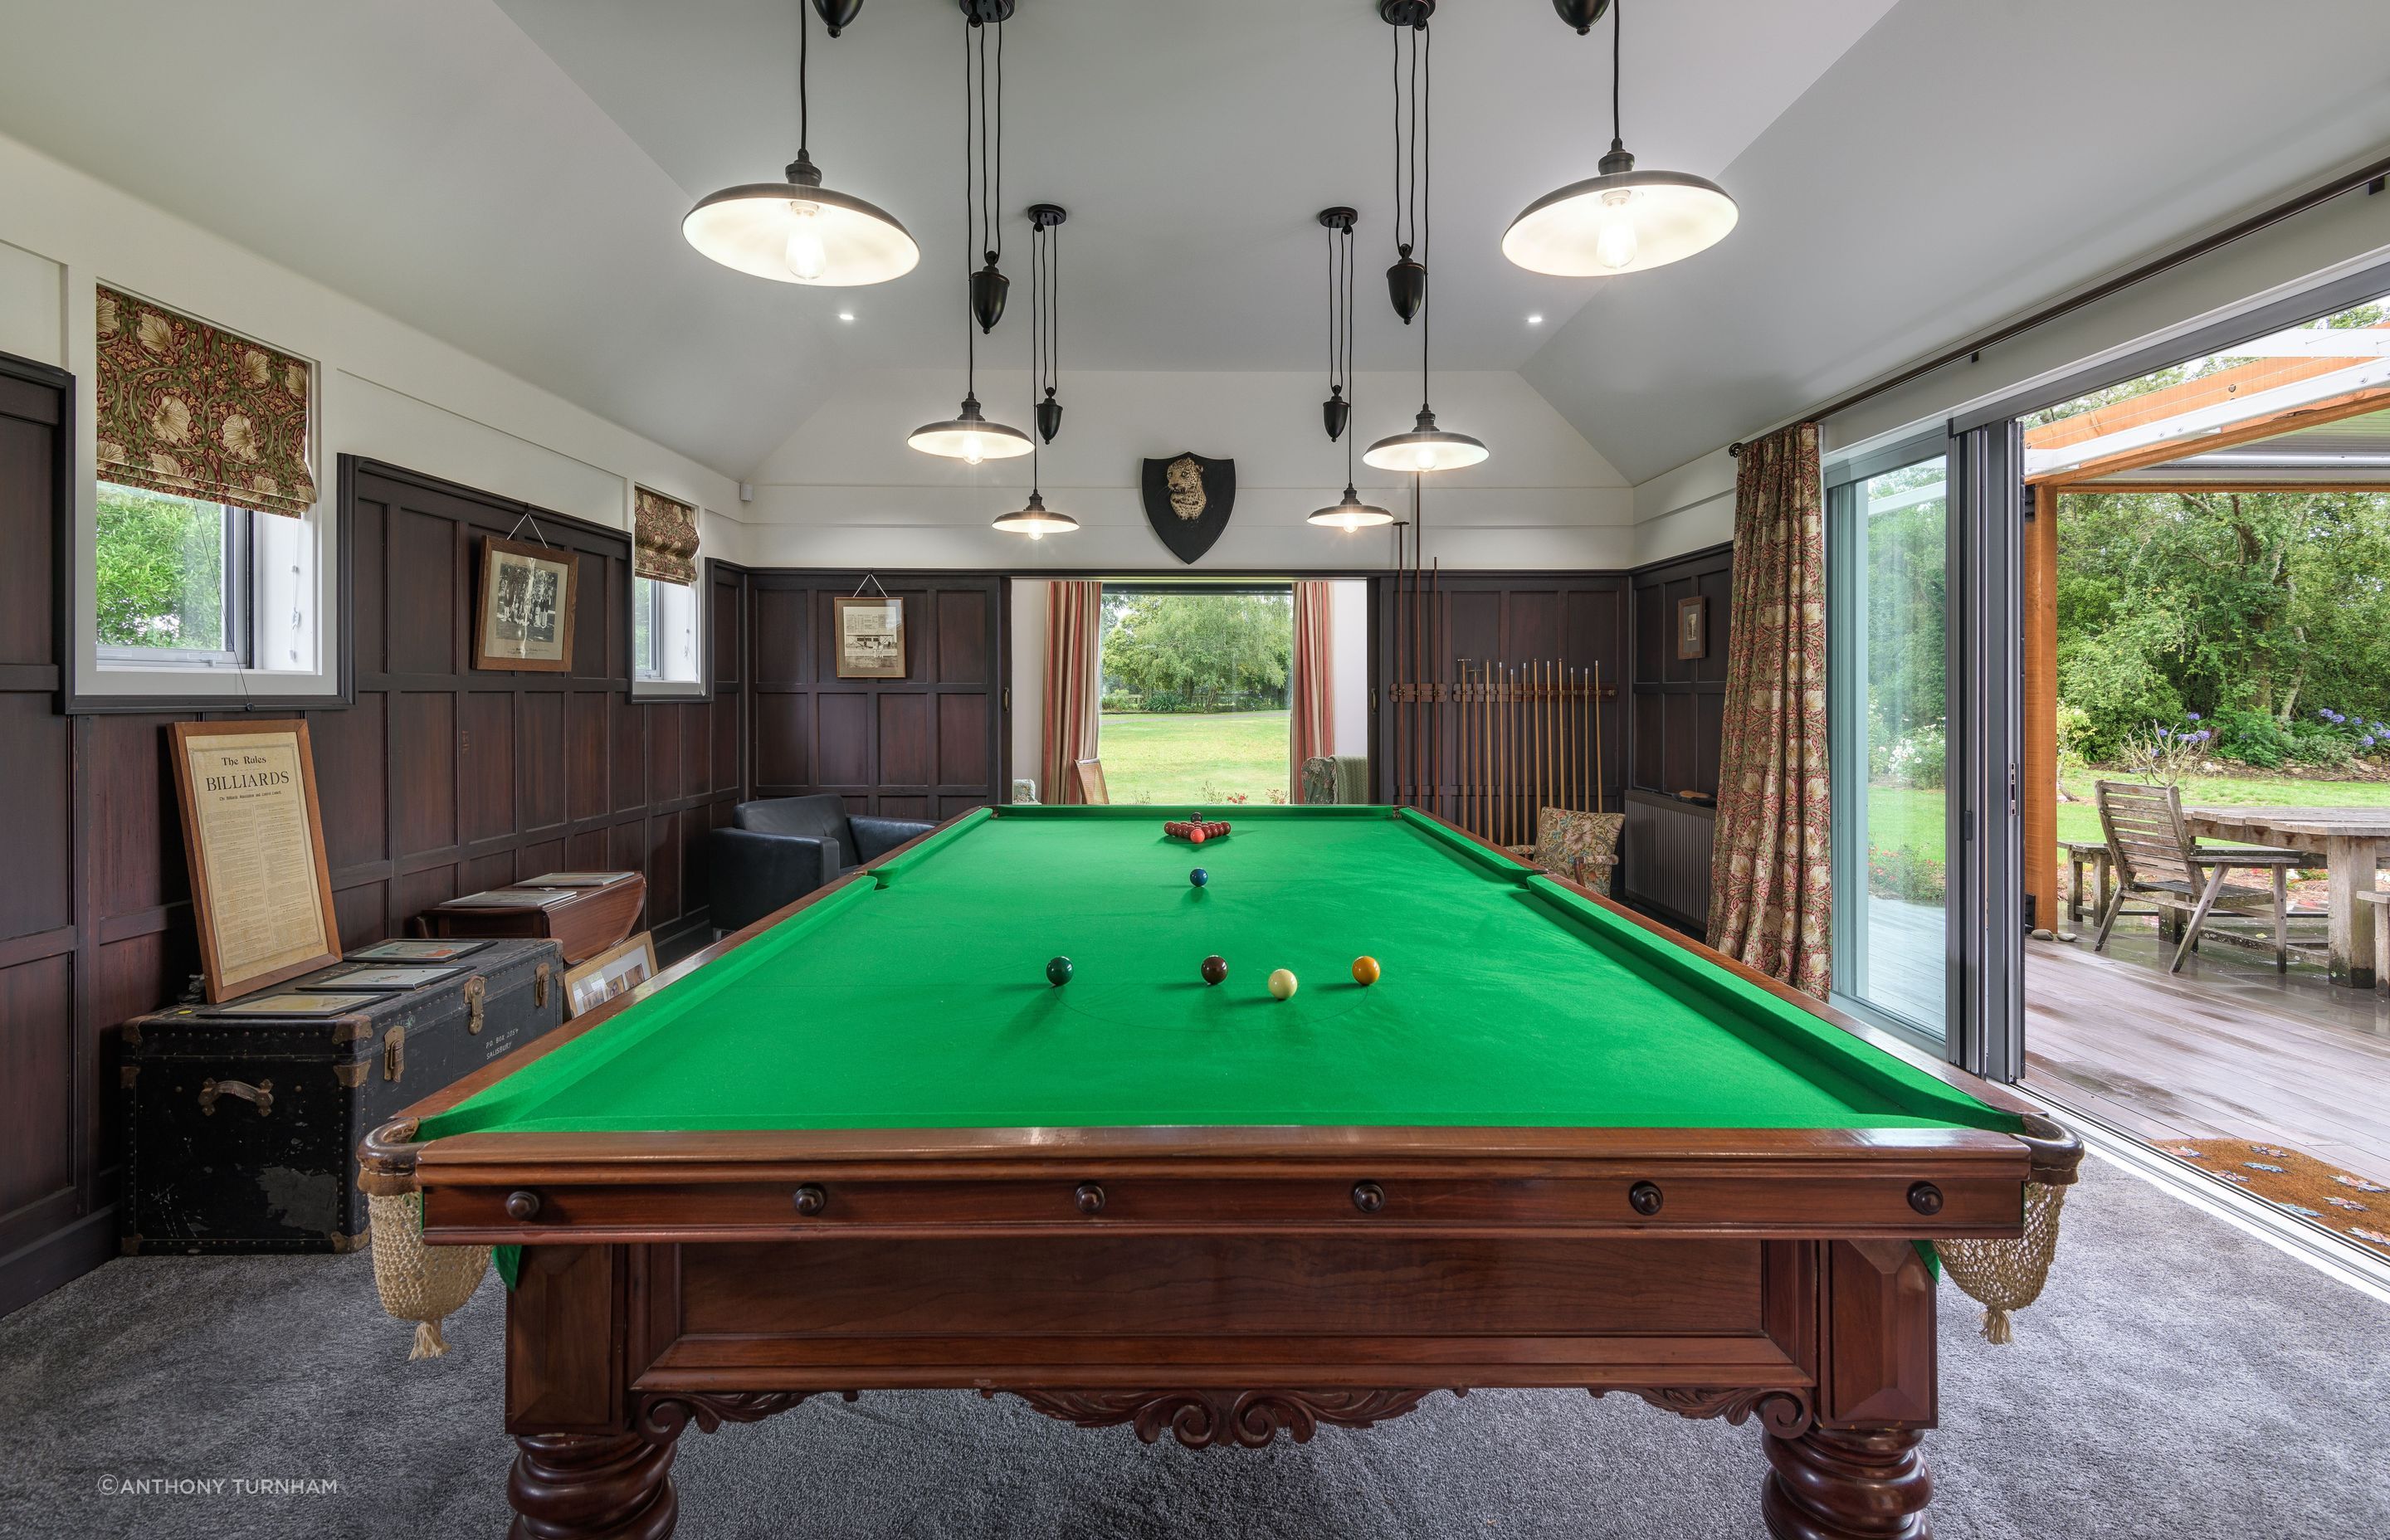 The billiards room harks back to traditional forms of entertainment, says Chris. “And it just provides a really nice space to be in.”